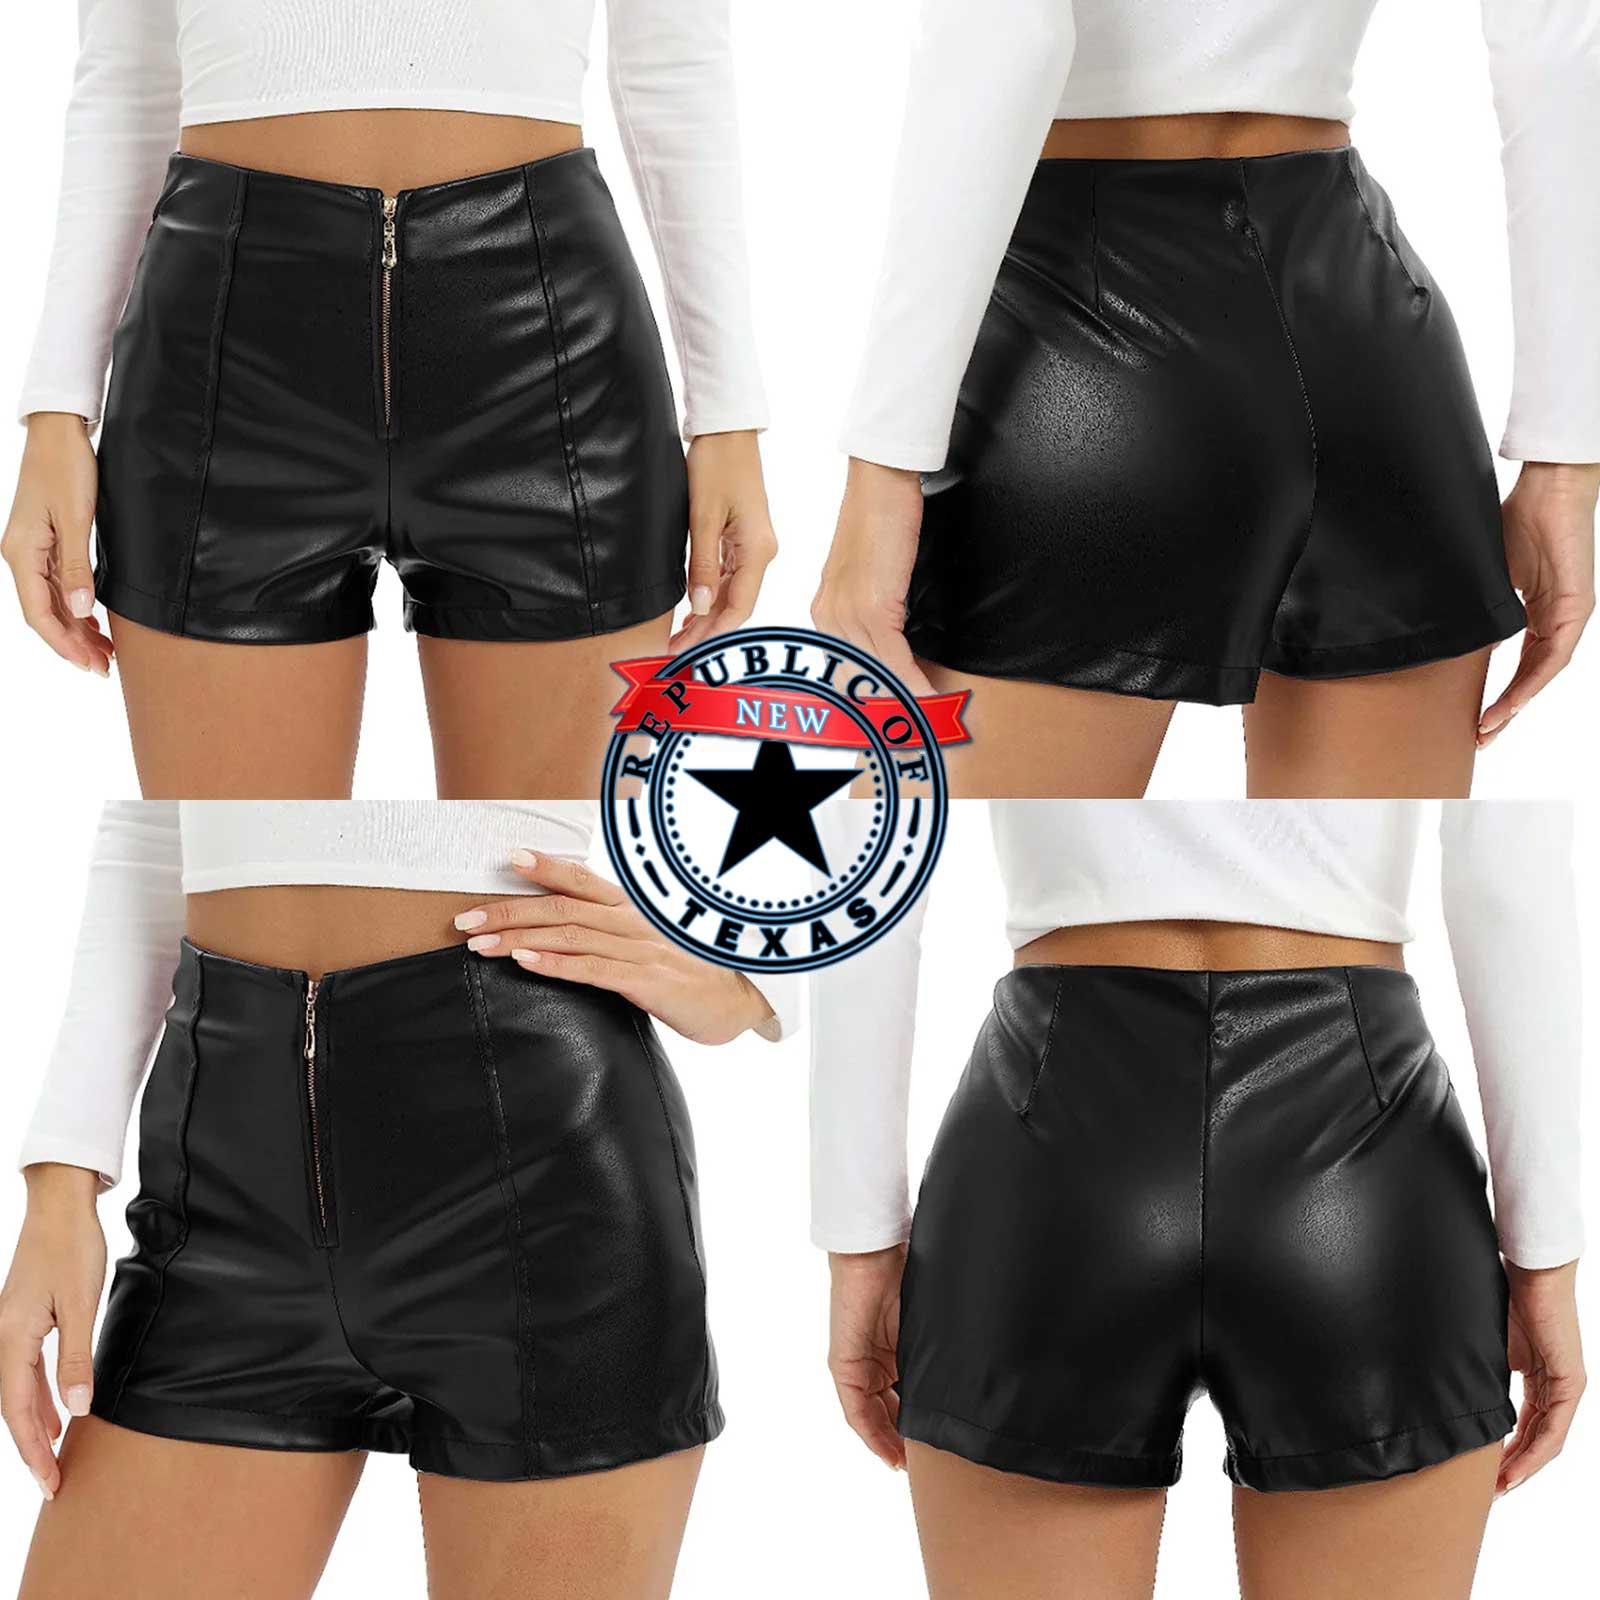 ntr-leather-shorts